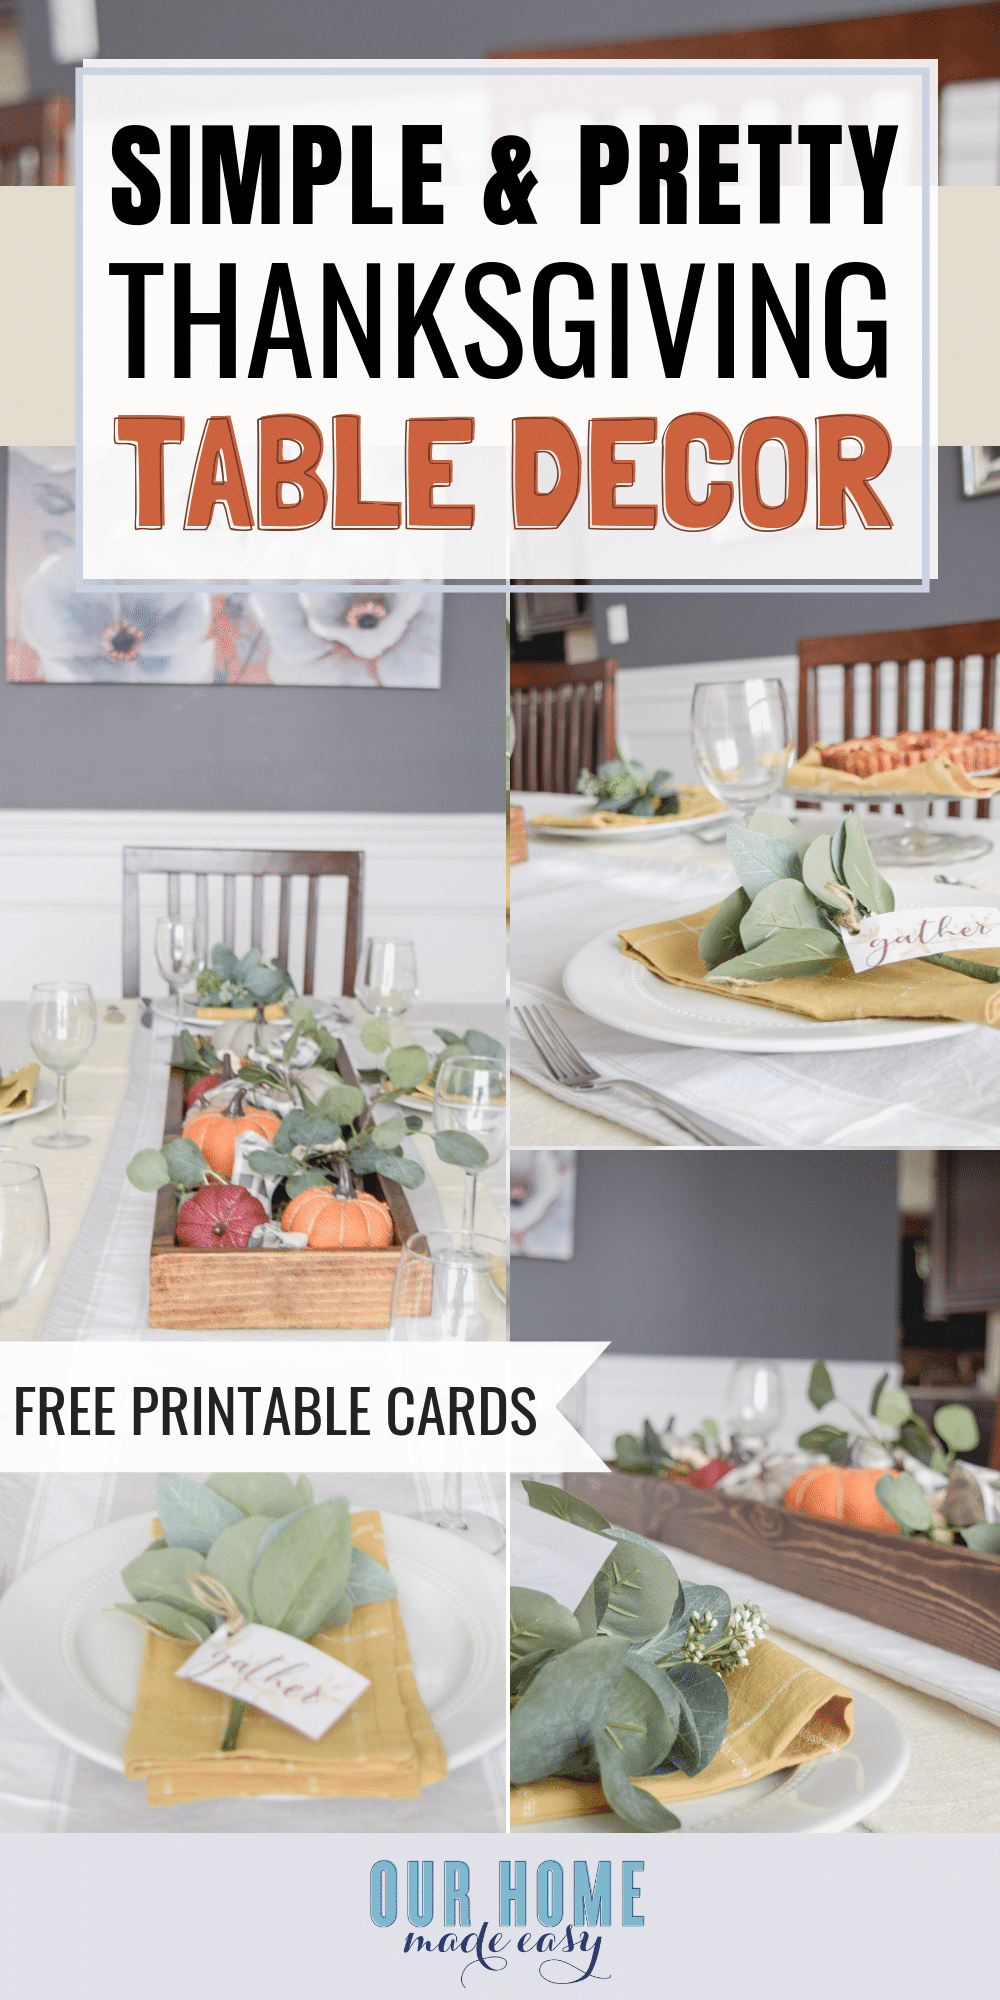 Make your Thanksgiving Table Decorations an easy DIY this year! Avoid spending too much money by using what you have on-hand and printing off a free 'Gather' tag.  #thanksgiving #tablesettings #homedecor #ourhomemadeeasy